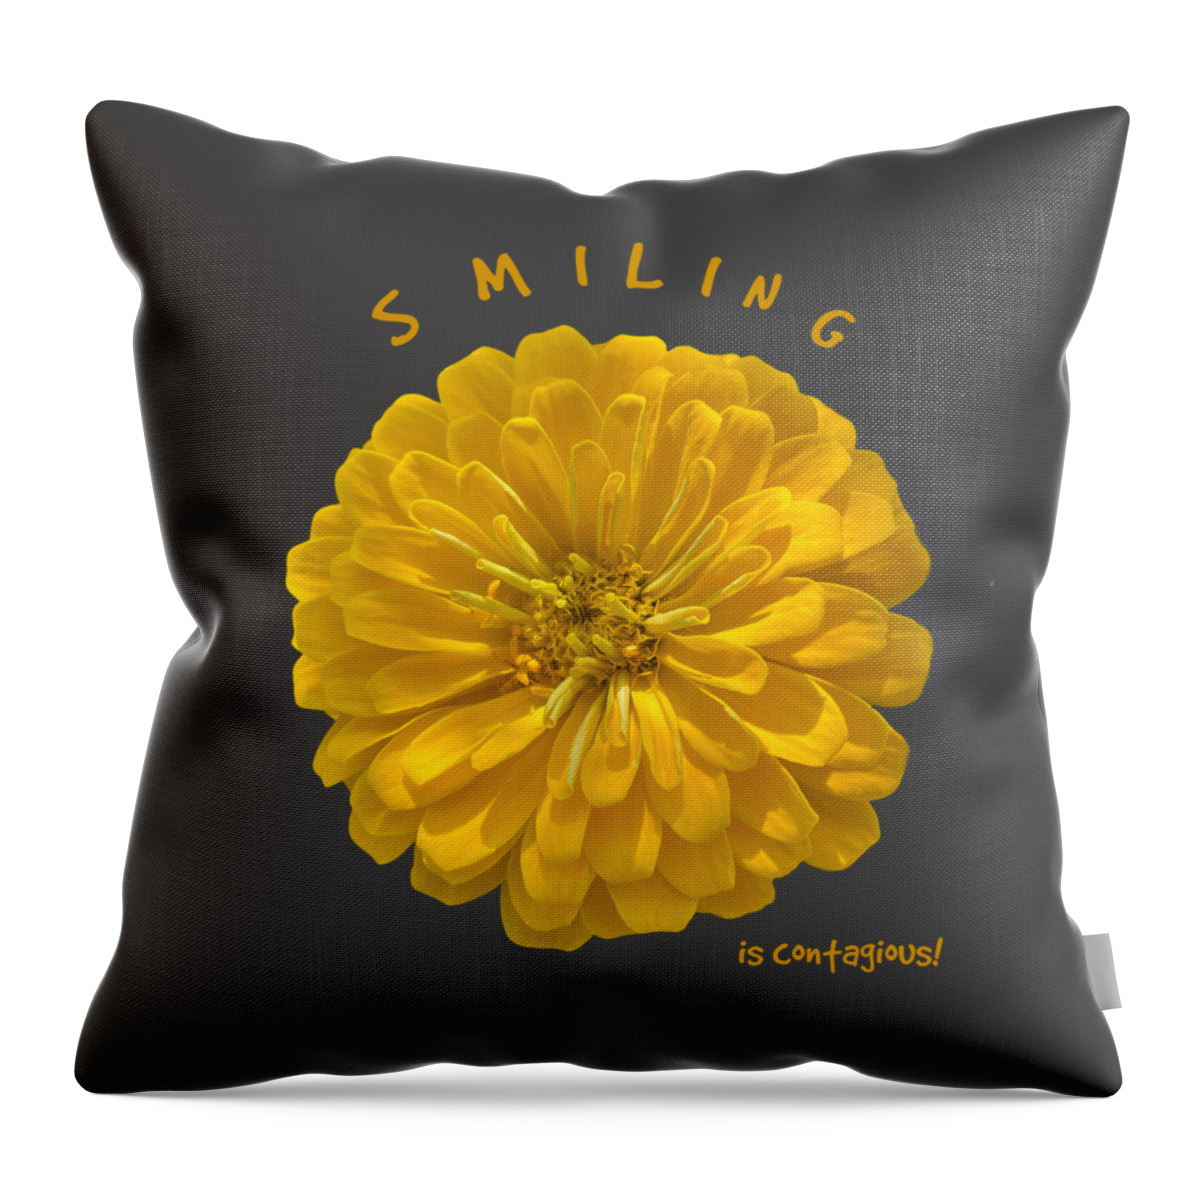 Smile Throw Pillow featuring the photograph Smiling is Congtagious by Carol Groenen